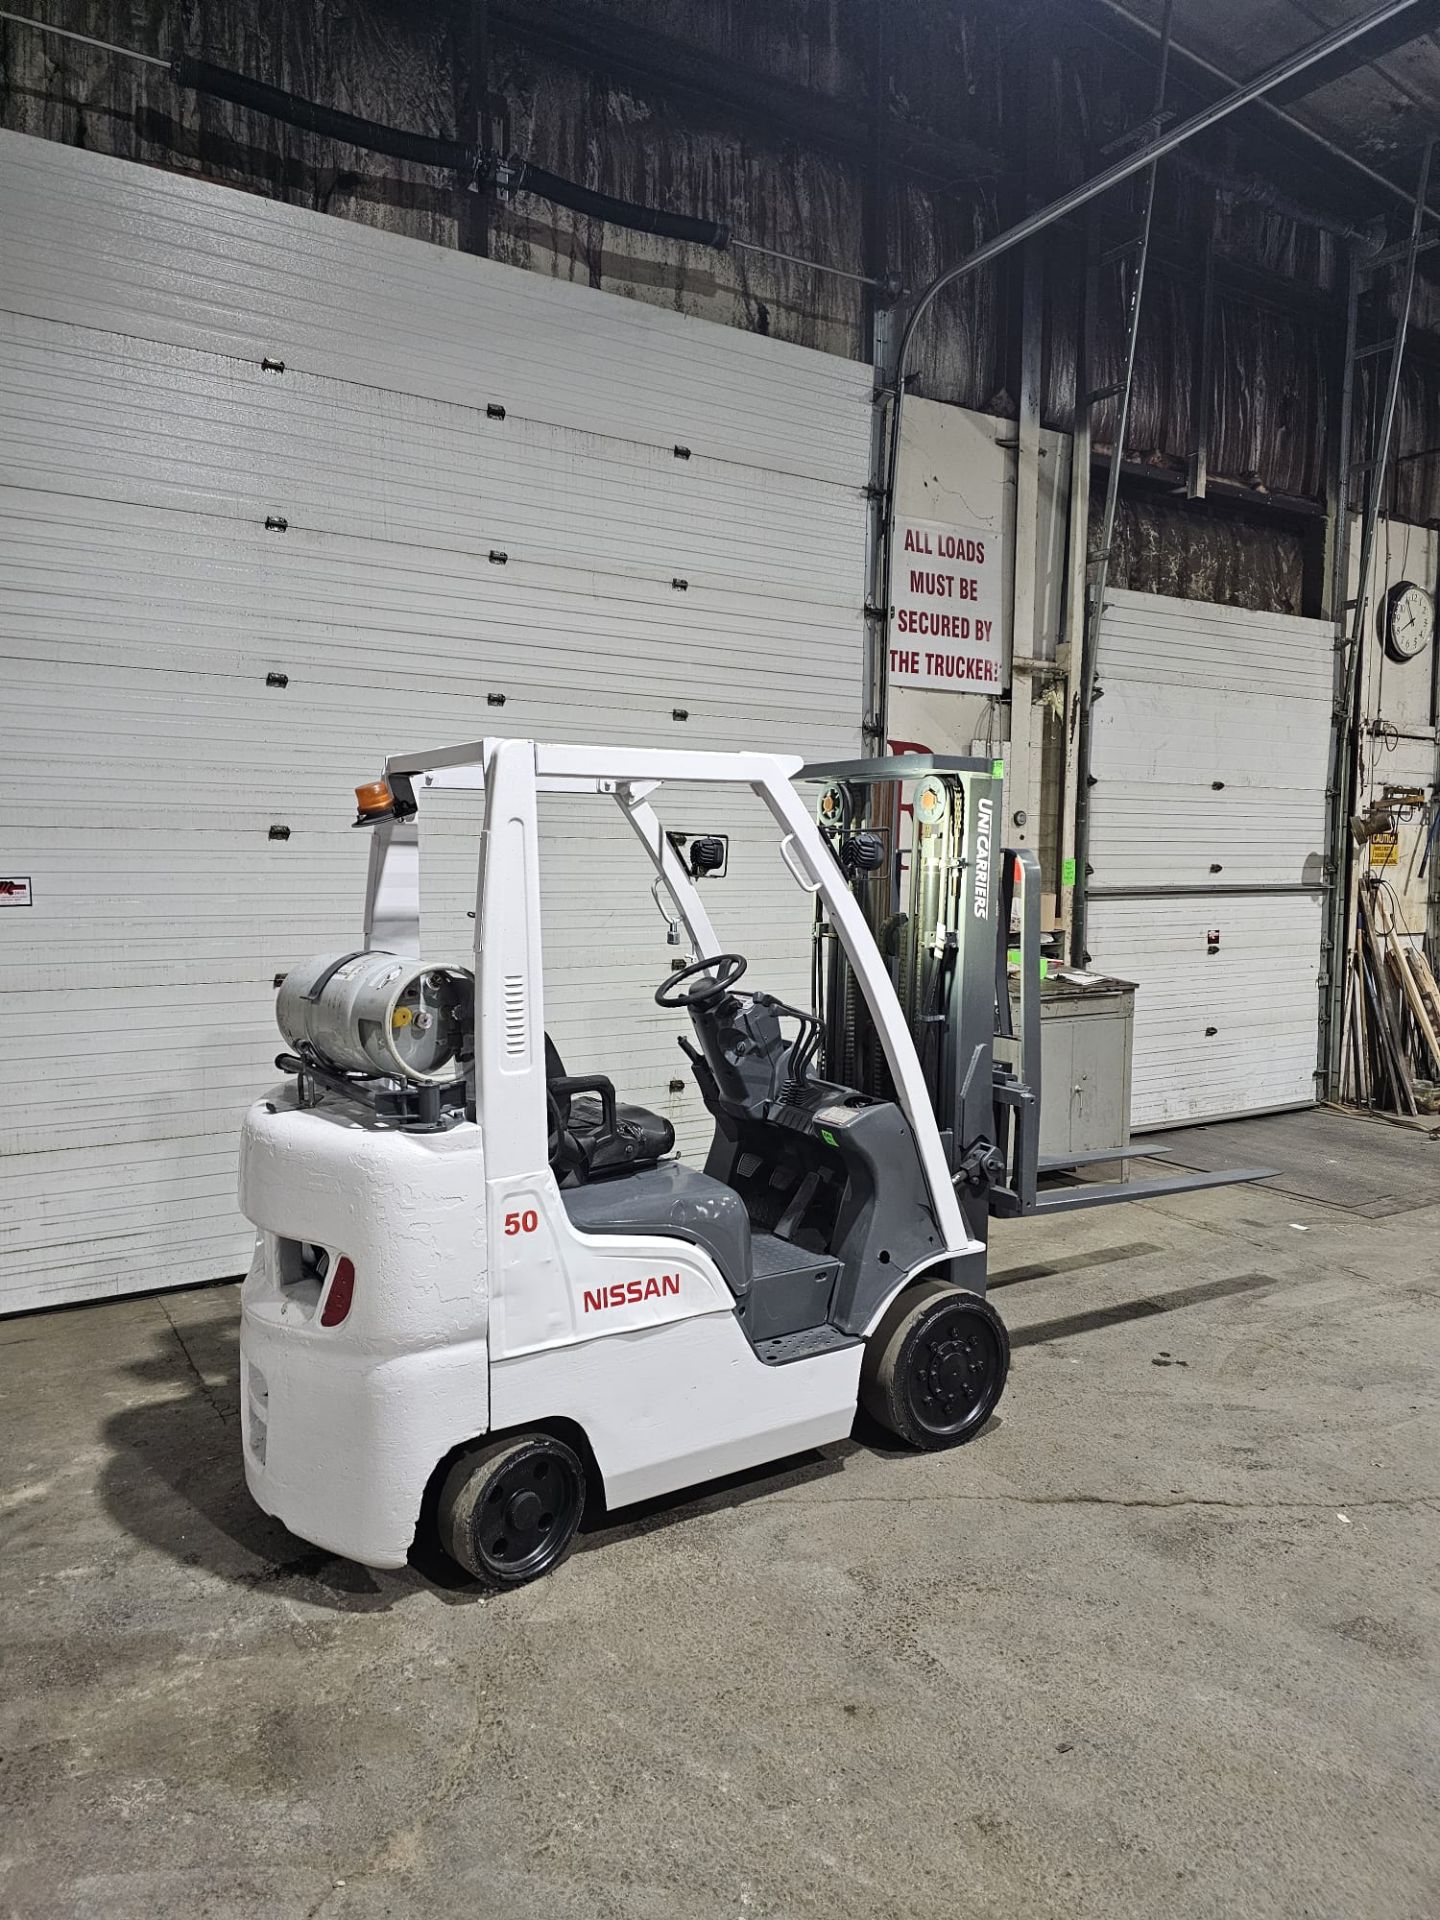 2015 Nissan 5000lbs Capacity LPG (Propane) Forklift 3-STAGE MAST with sideshift (no propane tank - Image 5 of 5